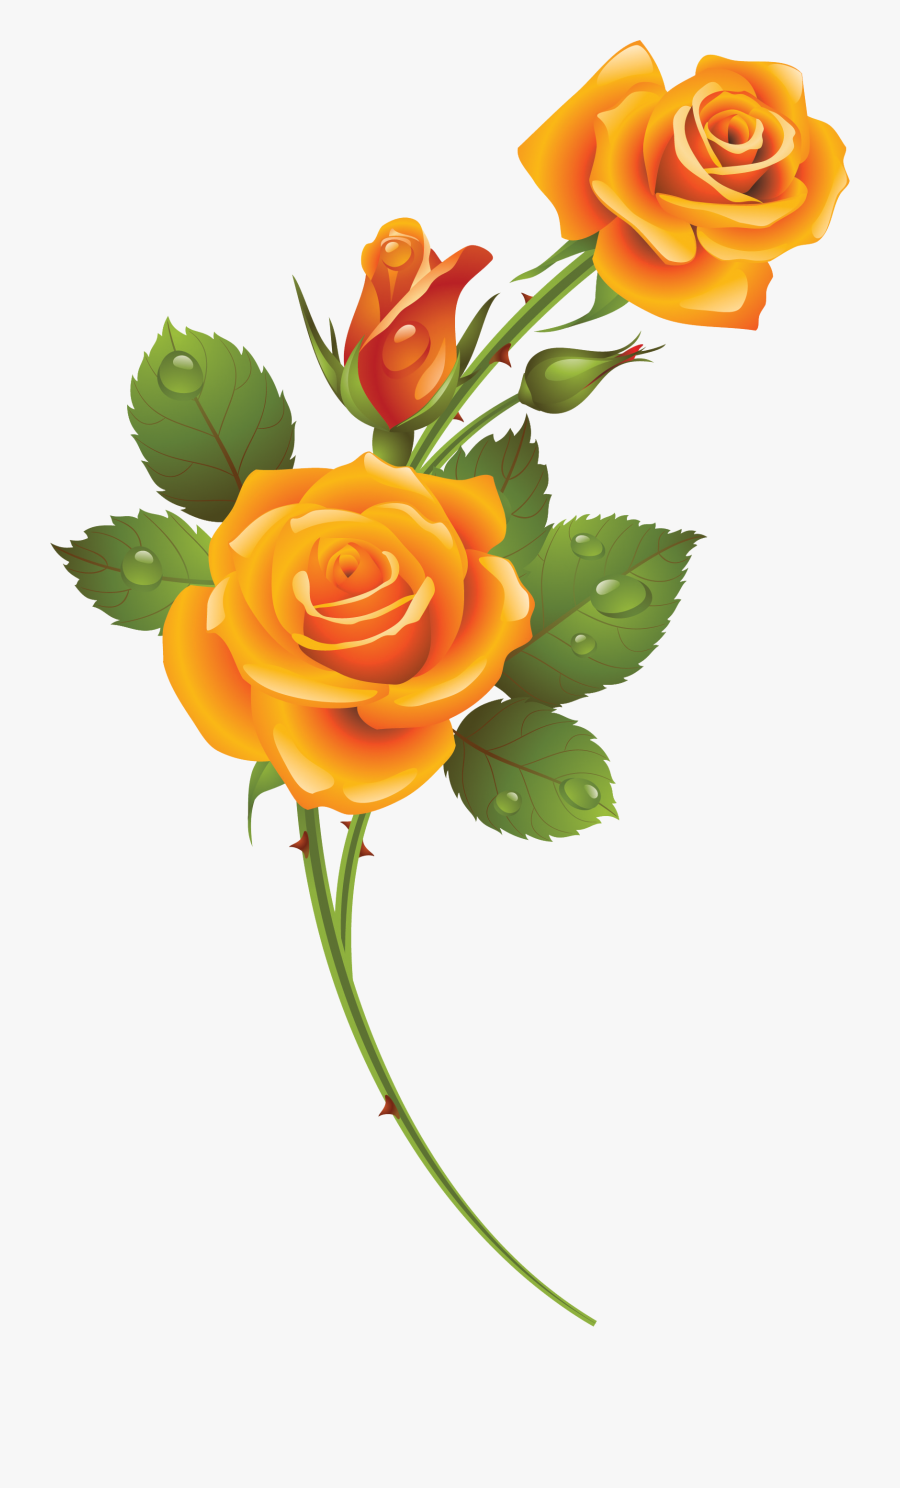 Rose - Background Yellow Rose Png Transparent, Transparent Clipart